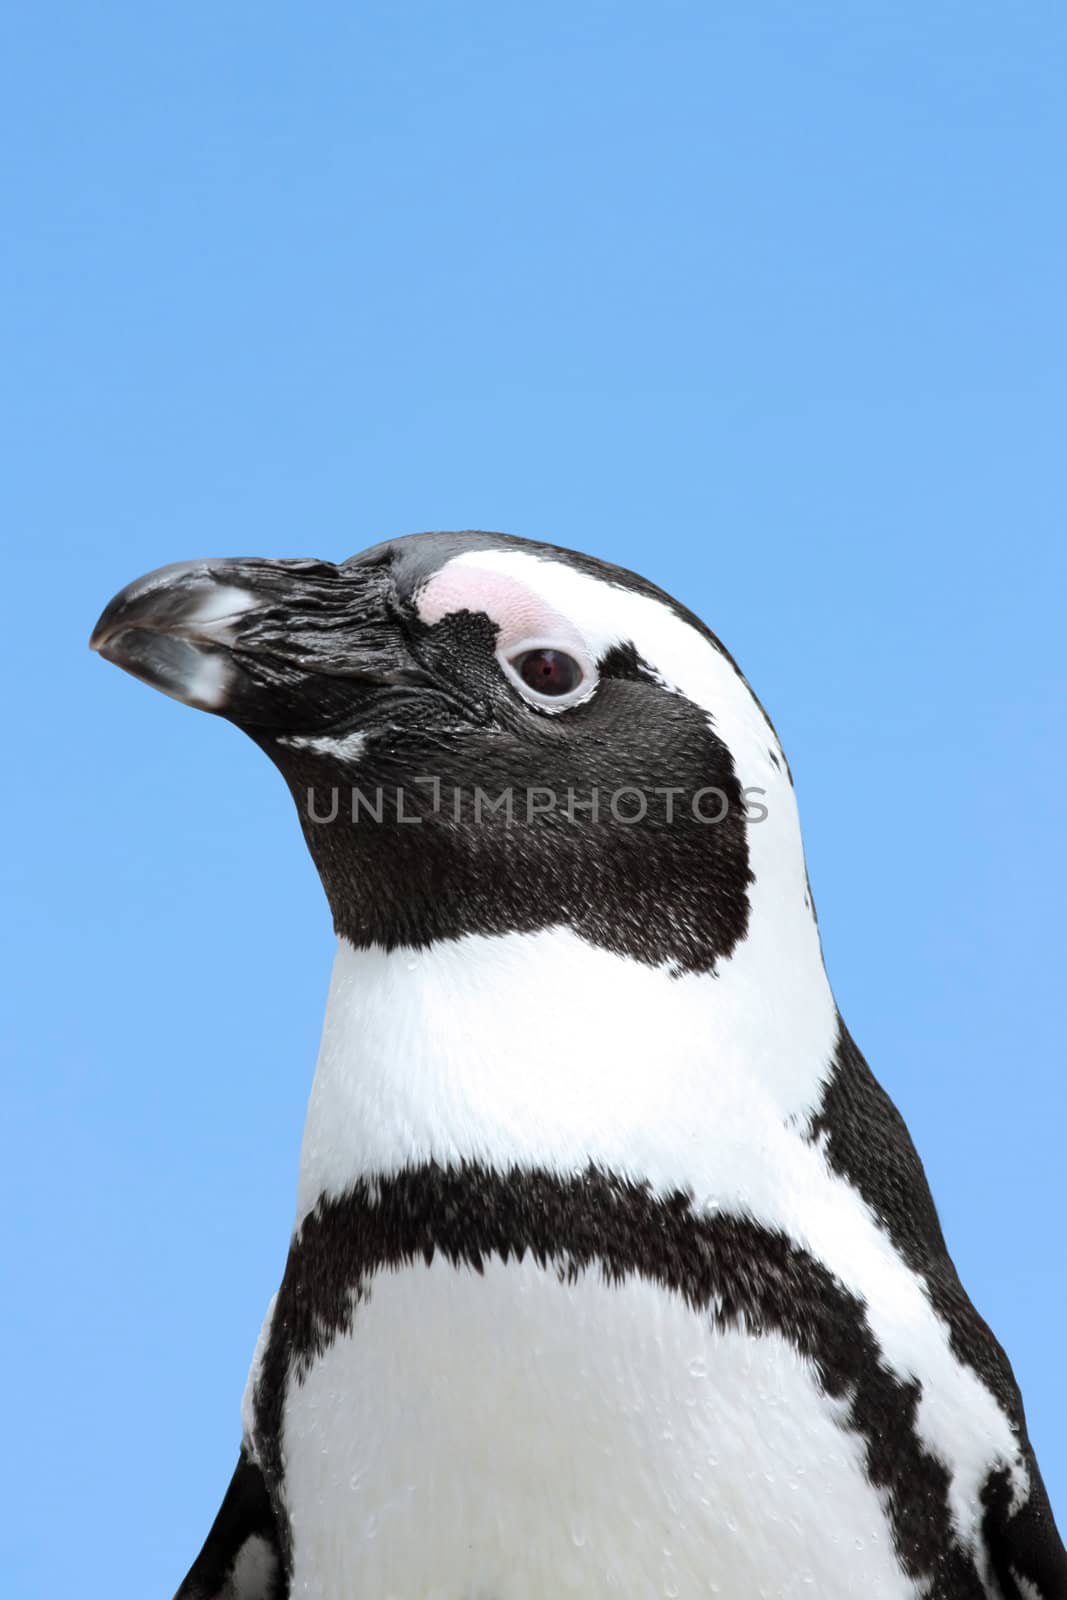 This image shows a portrait from a penguin